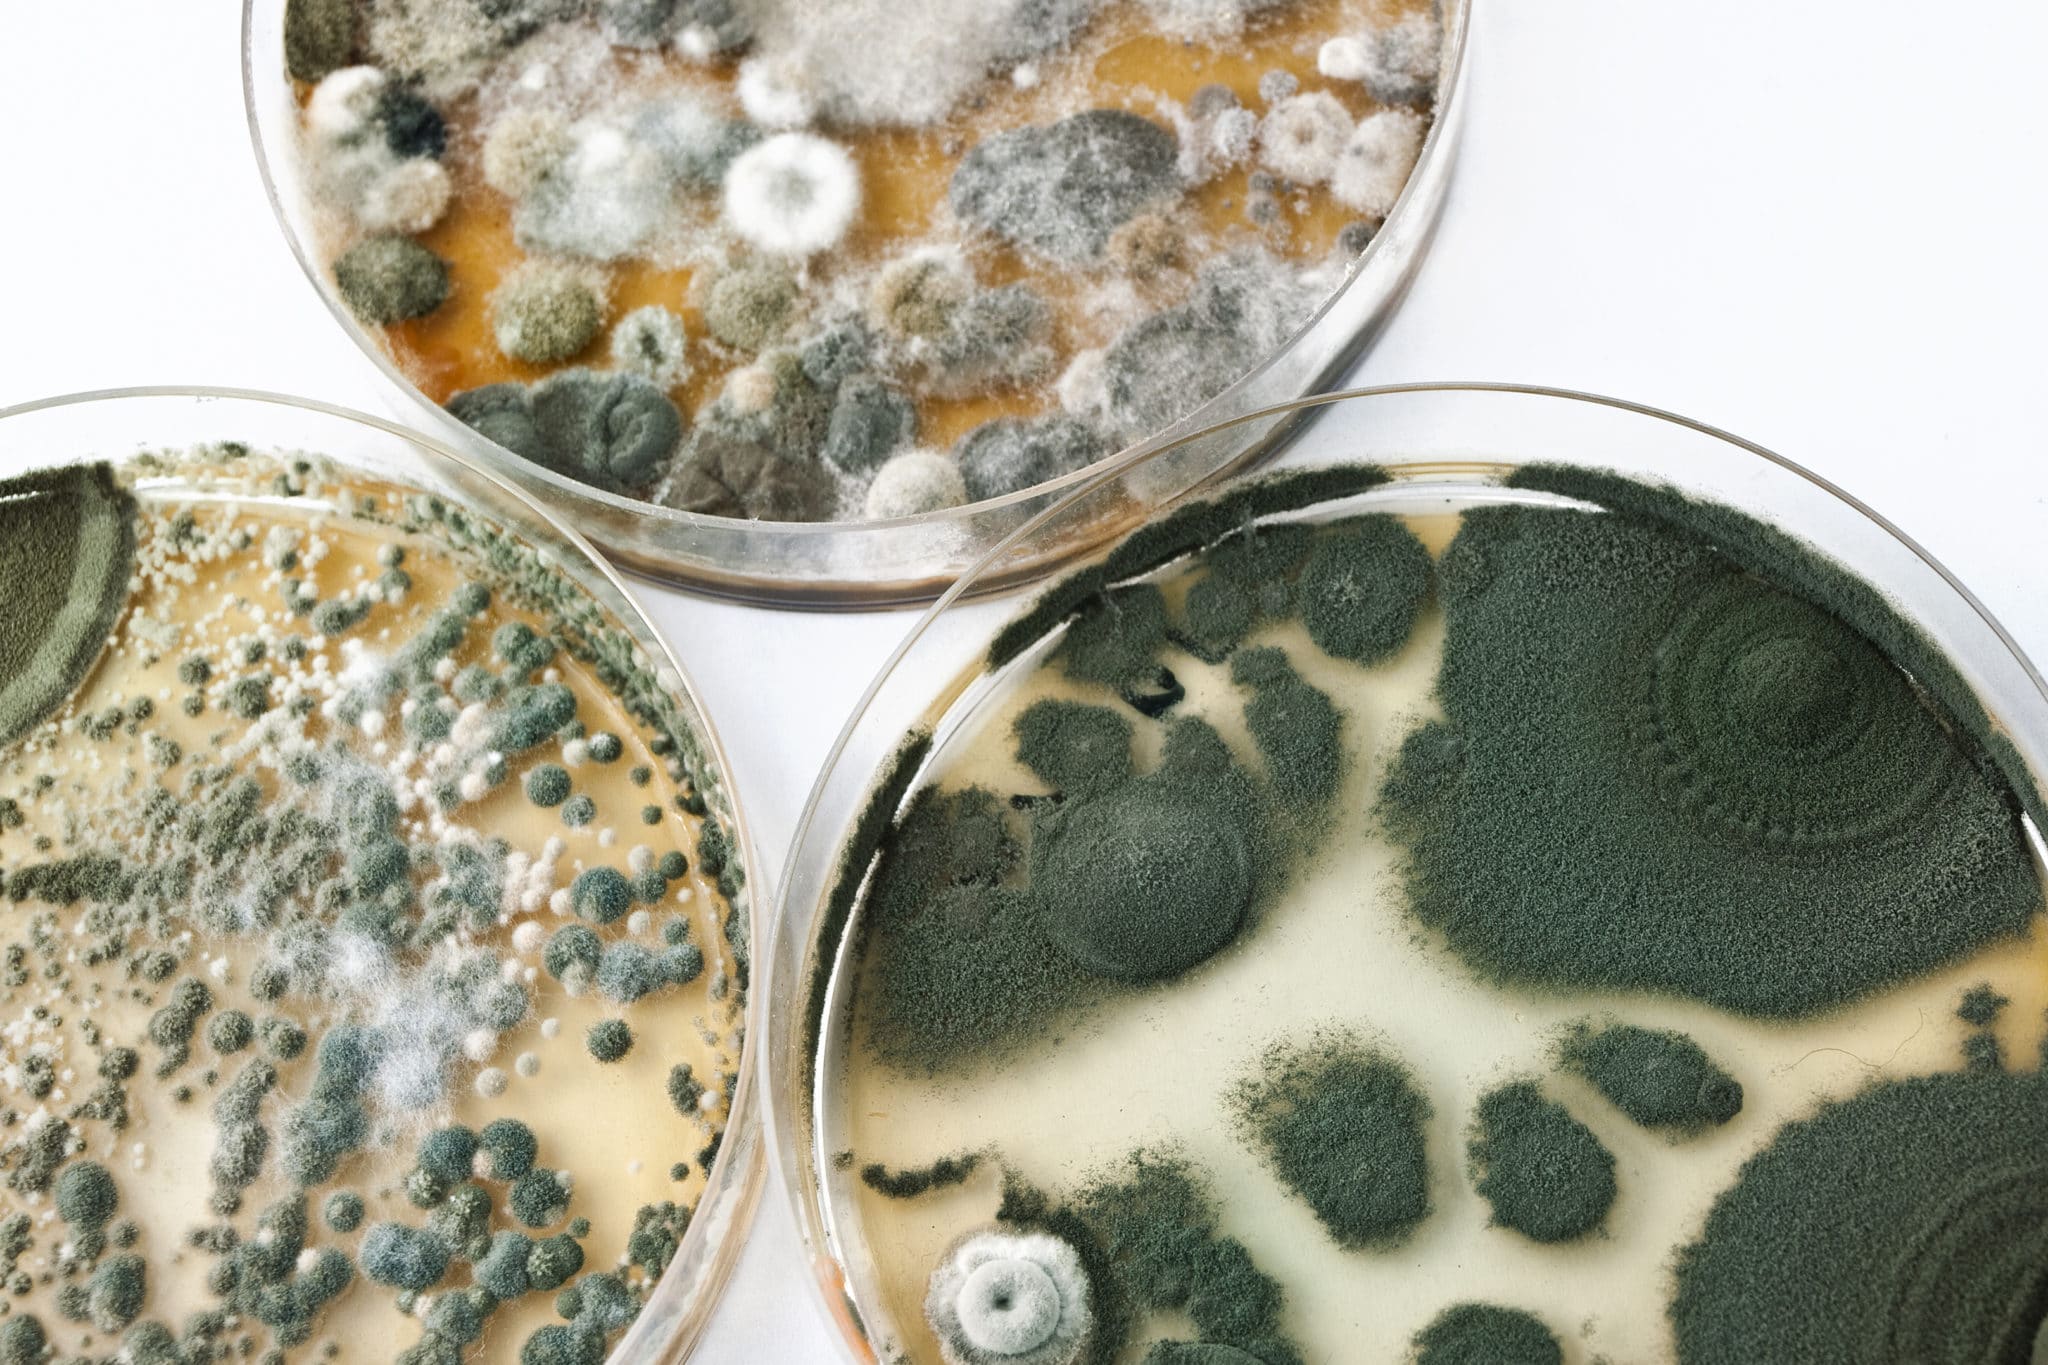 mold spore testing in home